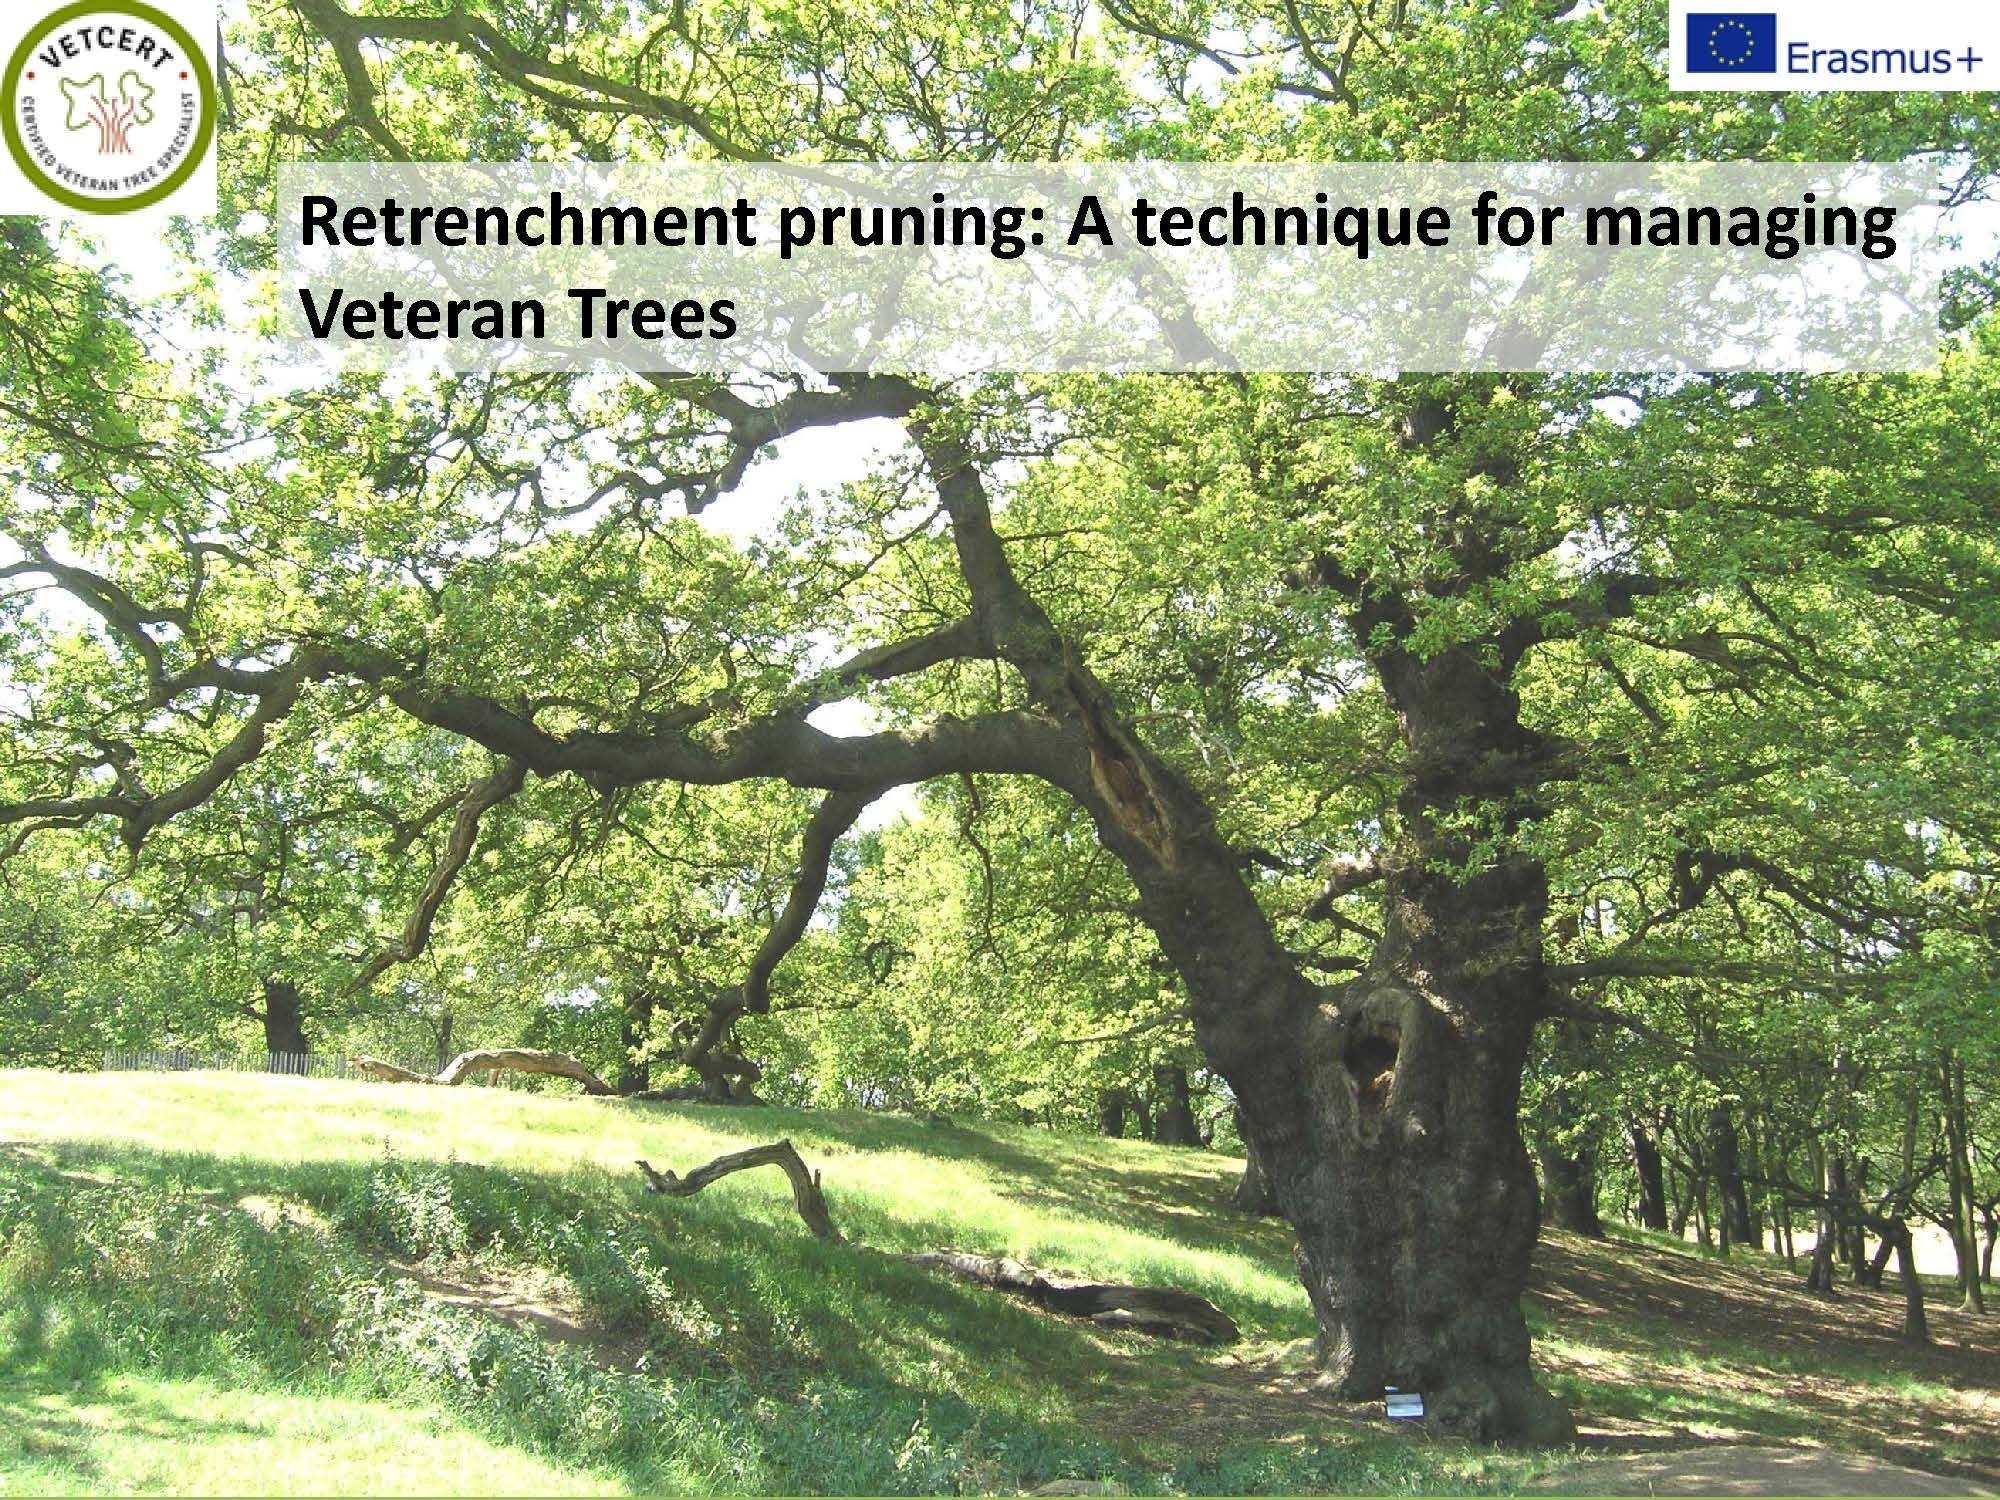 Retrenchment Pruning For Veteran Trees